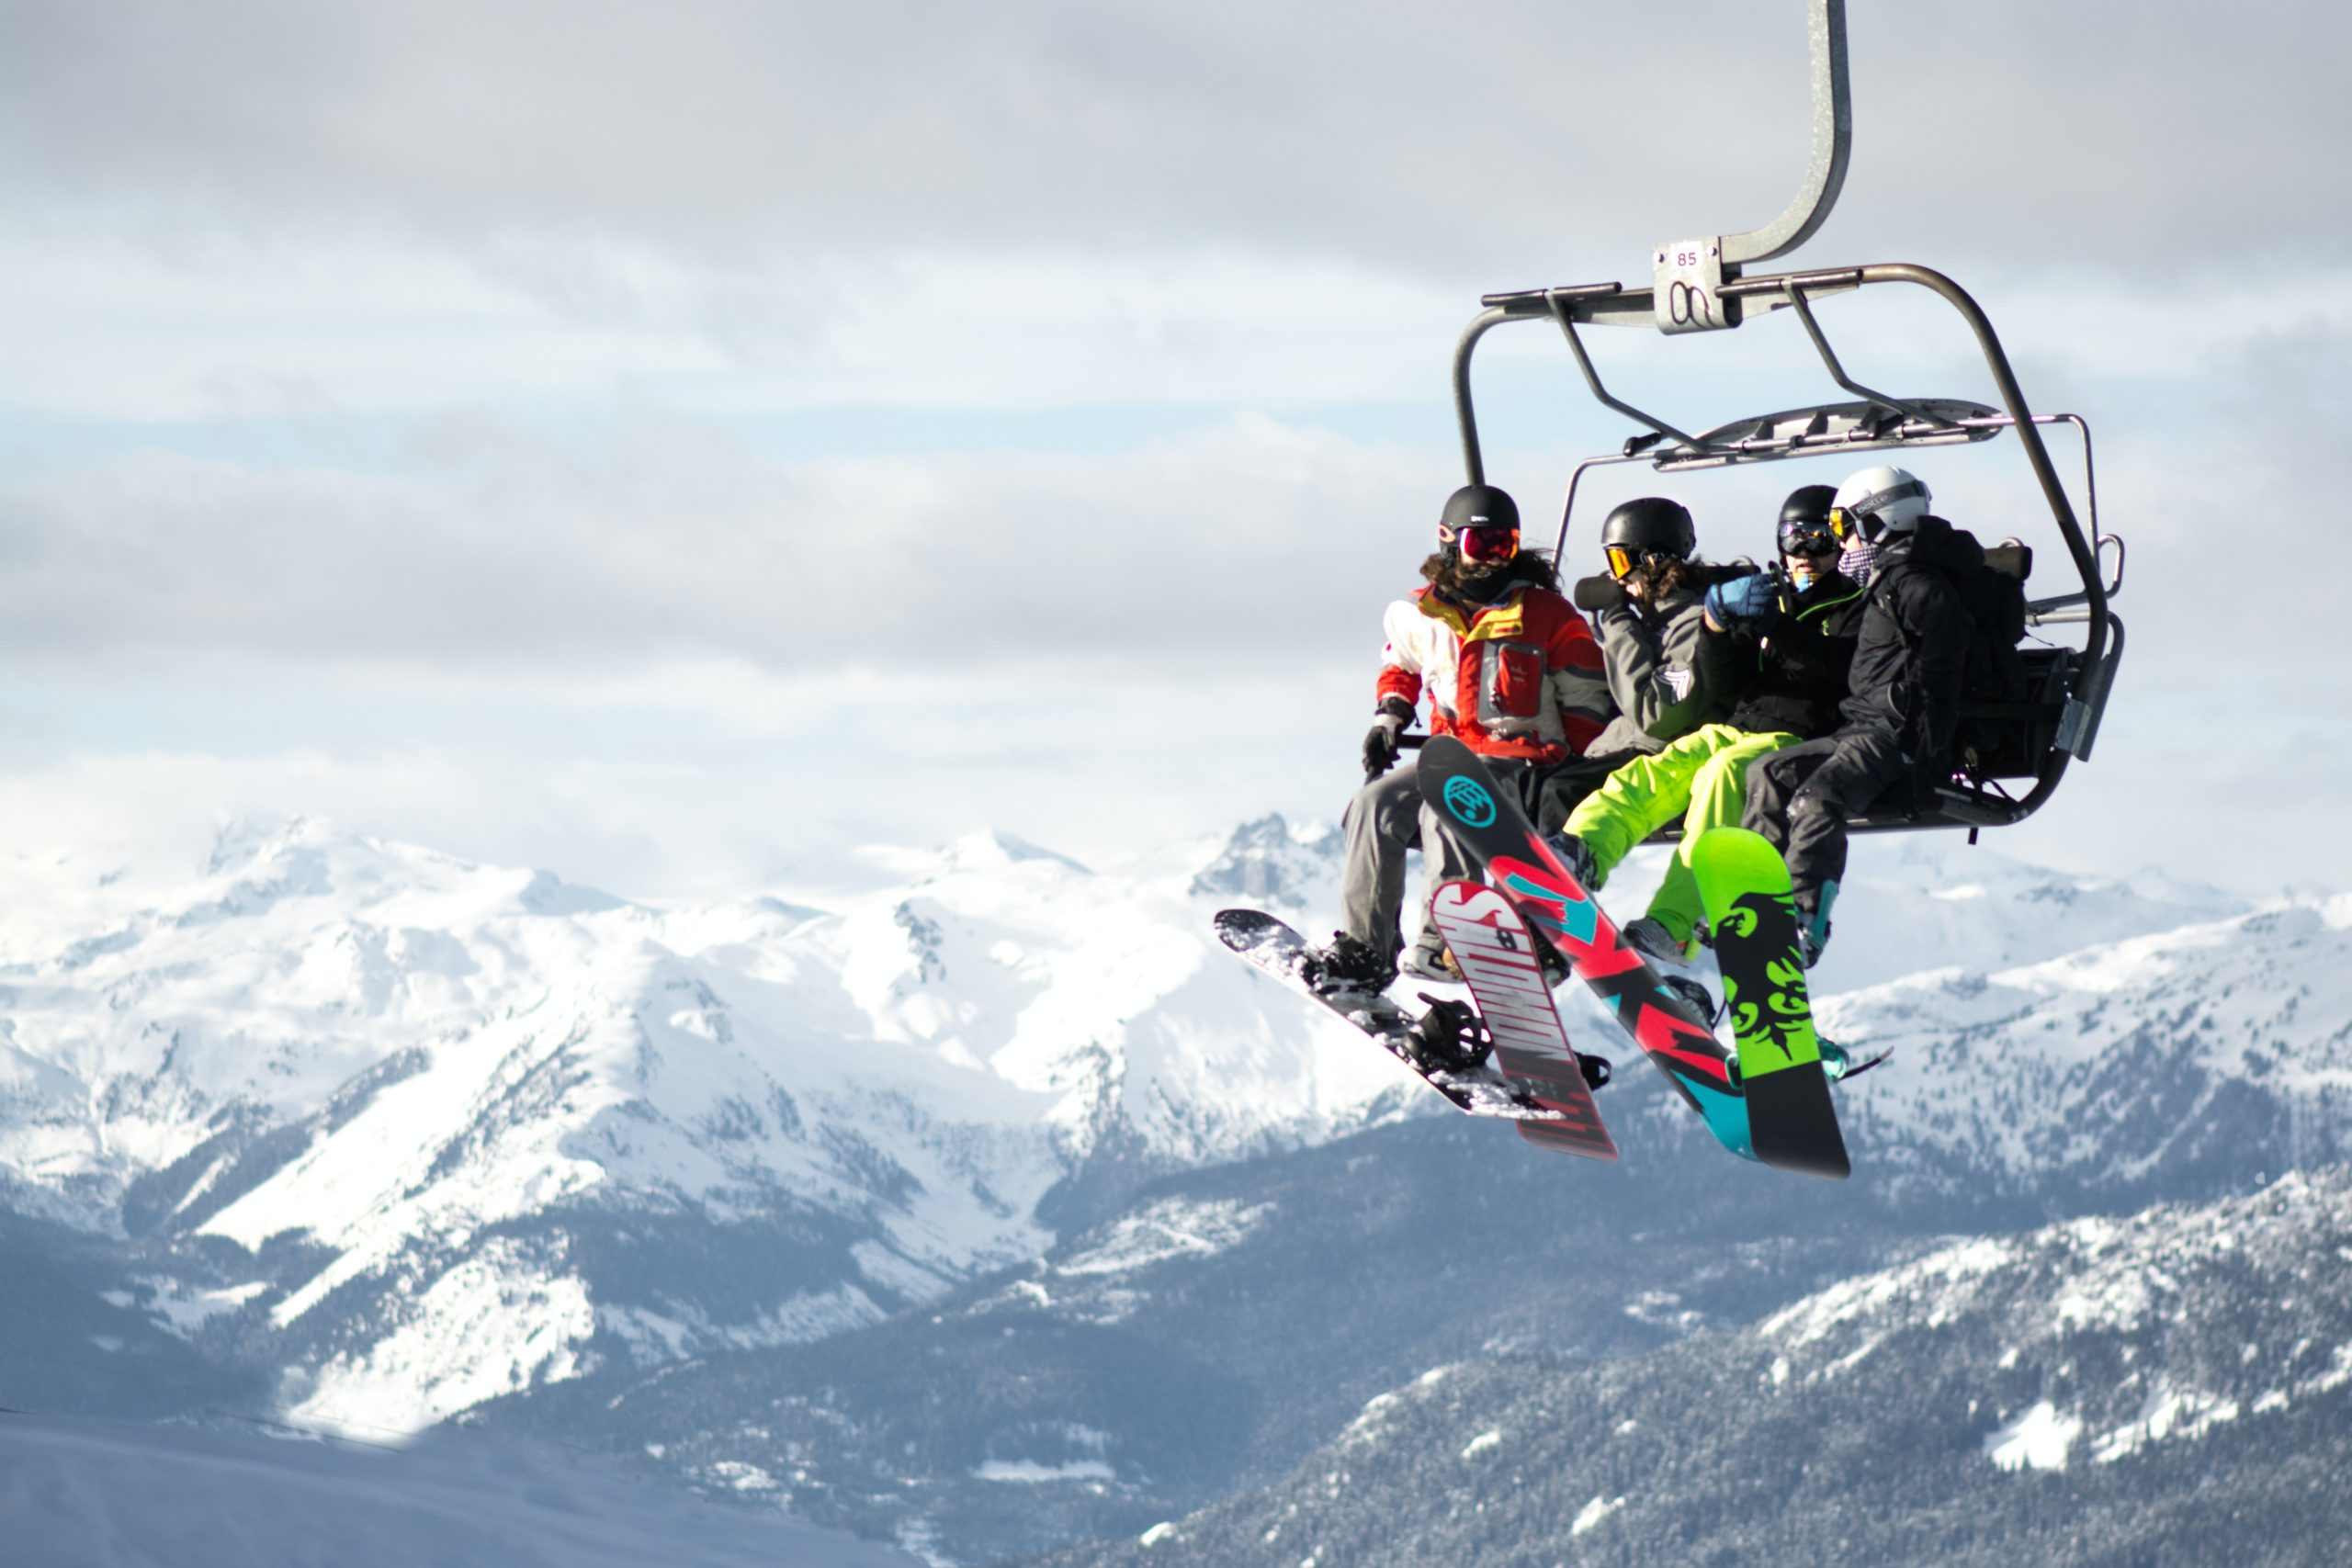 Four snowboarders ride a chairlift high above the ground. Snowy mountains crowd the background.